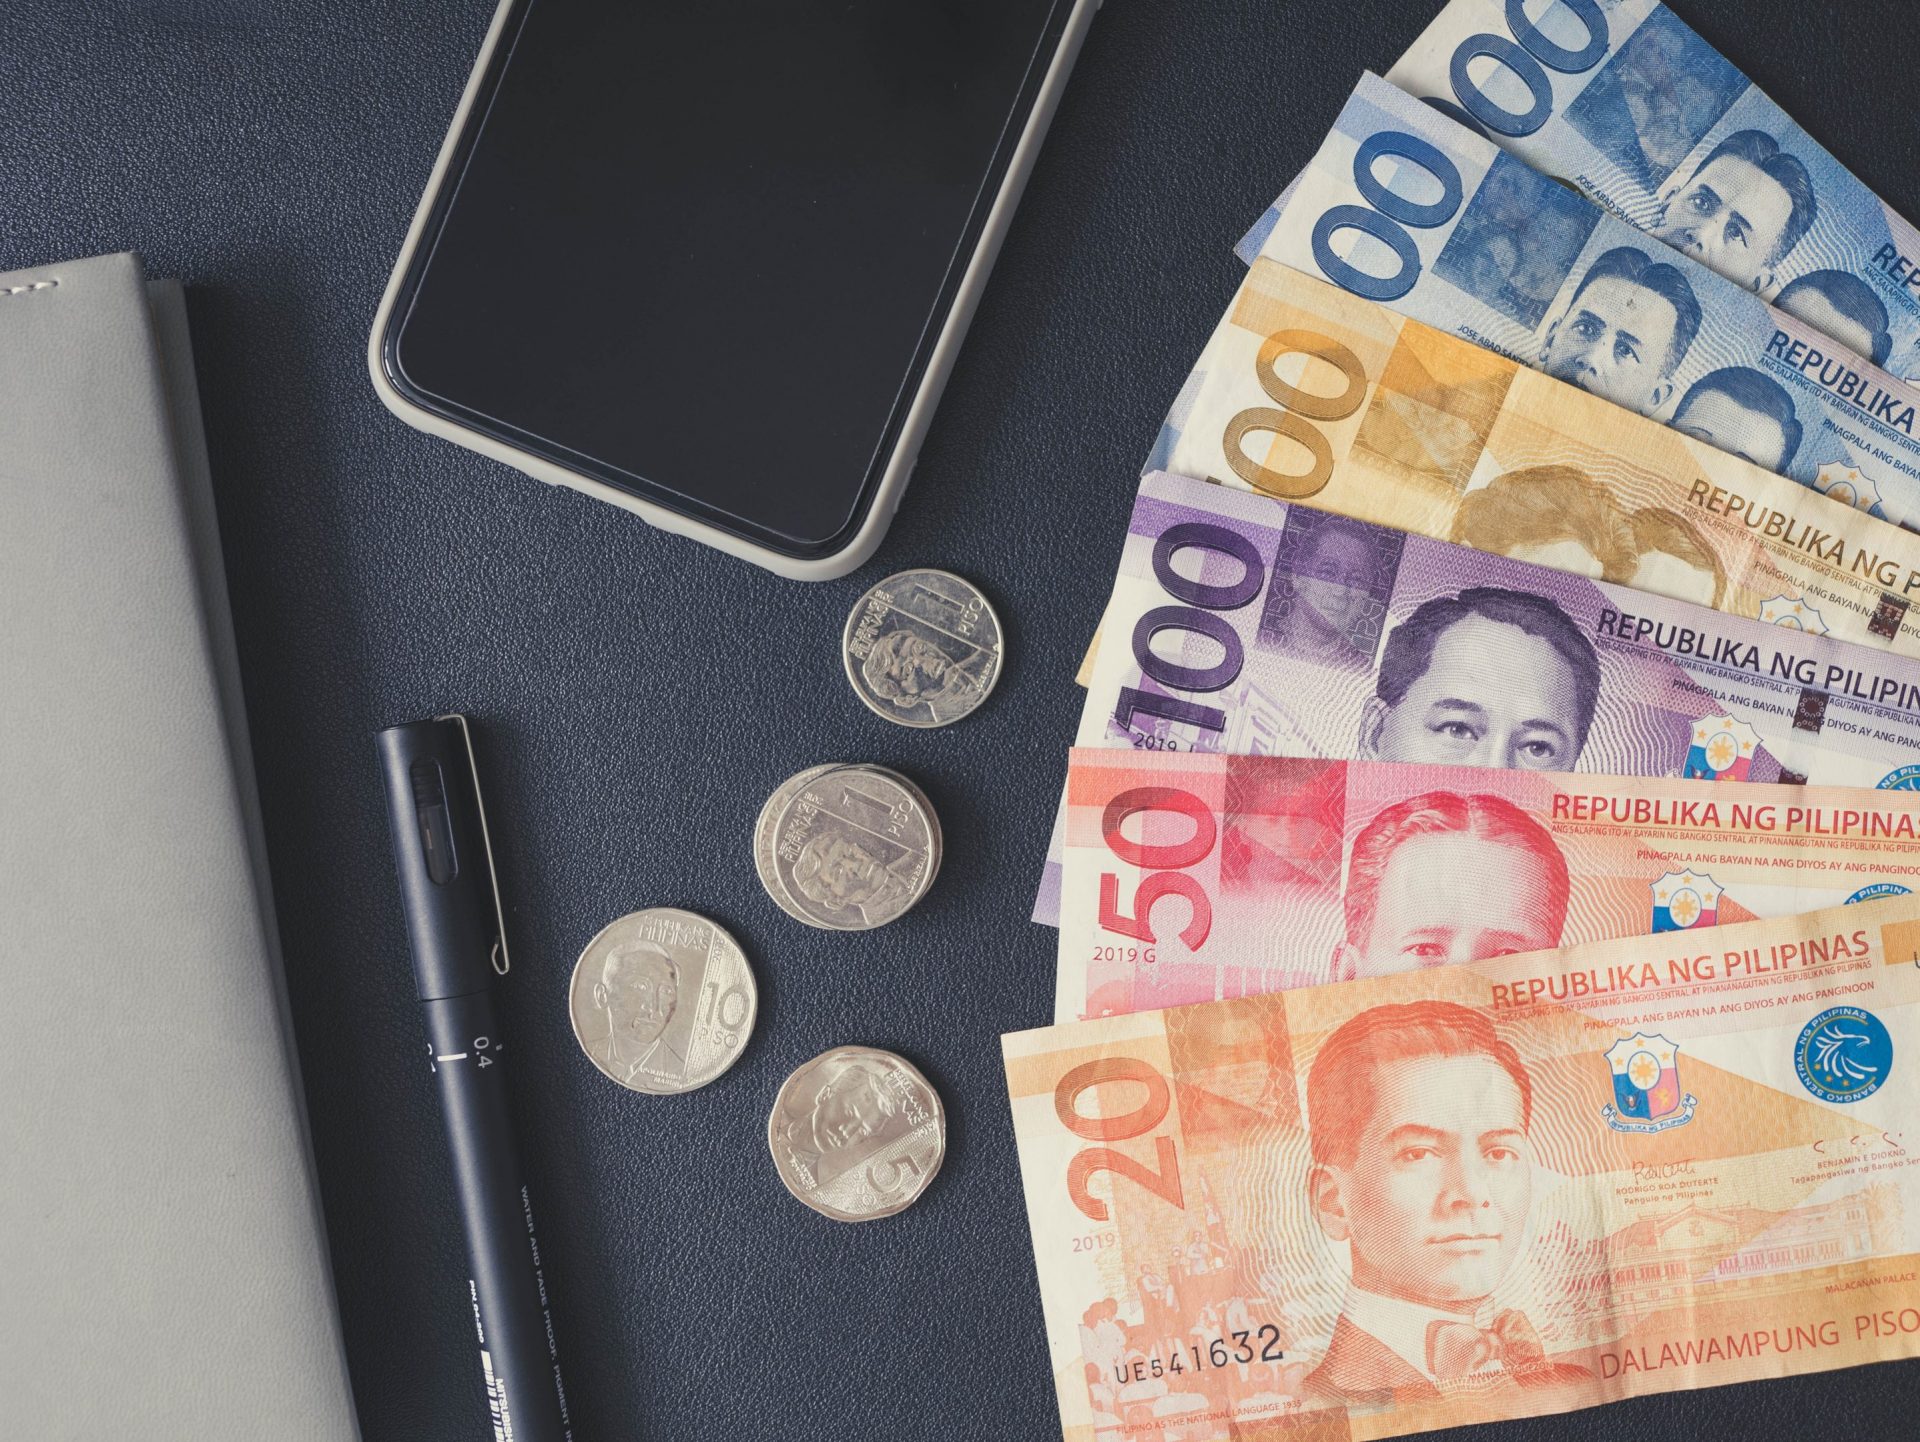 Flatlay photo of Philippine currency on the table beside a ballpen and phone